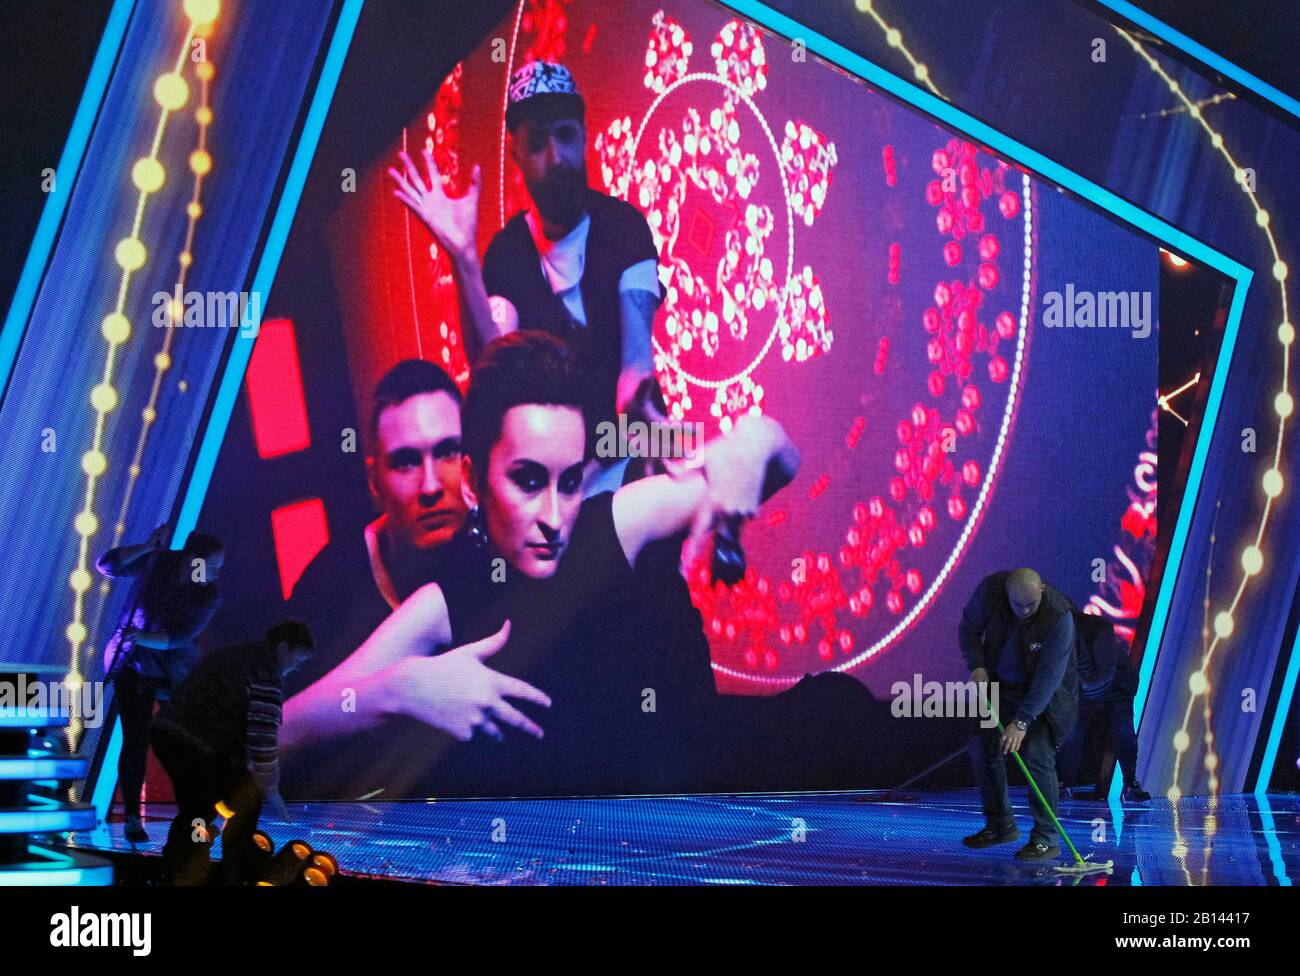 Kiev, Ukraine. 22nd Feb, 2020. Members of Ukrainian band Go A is seen on a screen video as workers clean the stage during the 2020 Eurovision Song Contest (ESC) national selection show in Kiev.Ukrainian band Go A with song Solovey will represent Ukraine at the 2020 Eurovision Song Contest (ESC) in Netherlands. The 65th anniversary Eurovision song contest will be held in Rotterdam (Netherlands) from May 12 to May 16, 2020. Ukraine, which missed the competition last year, intends to return to participation in 2020. Credit: SOPA Images Limited/Alamy Live News Stock Photo